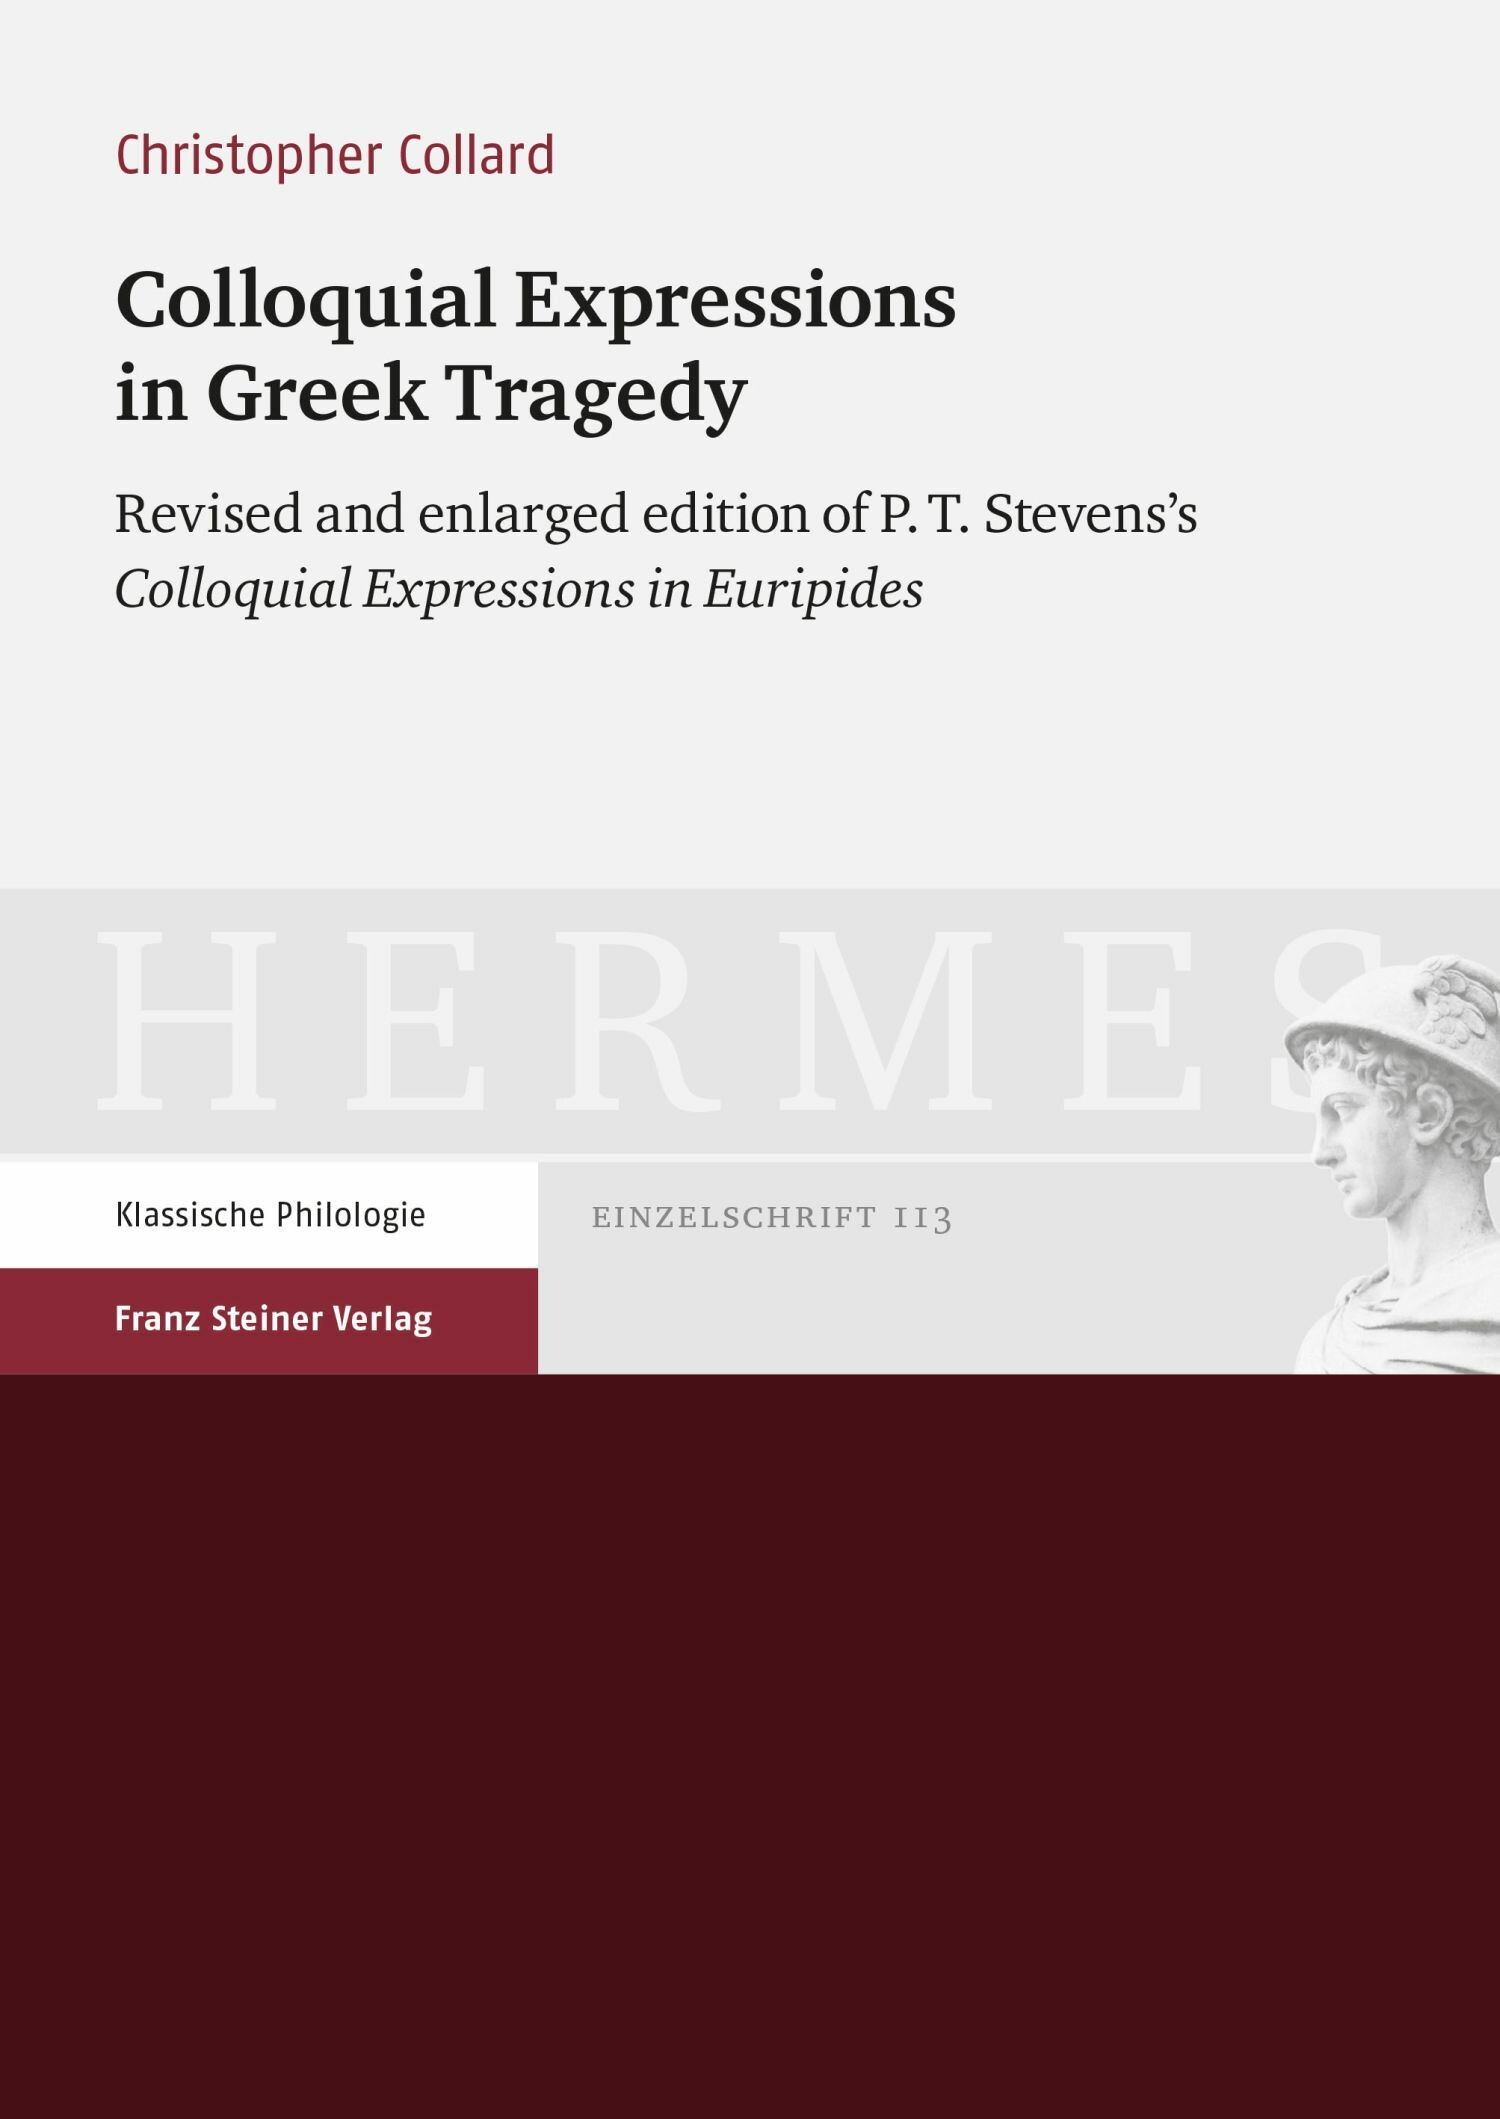 Colloquial Expressions in Greek Tragedy